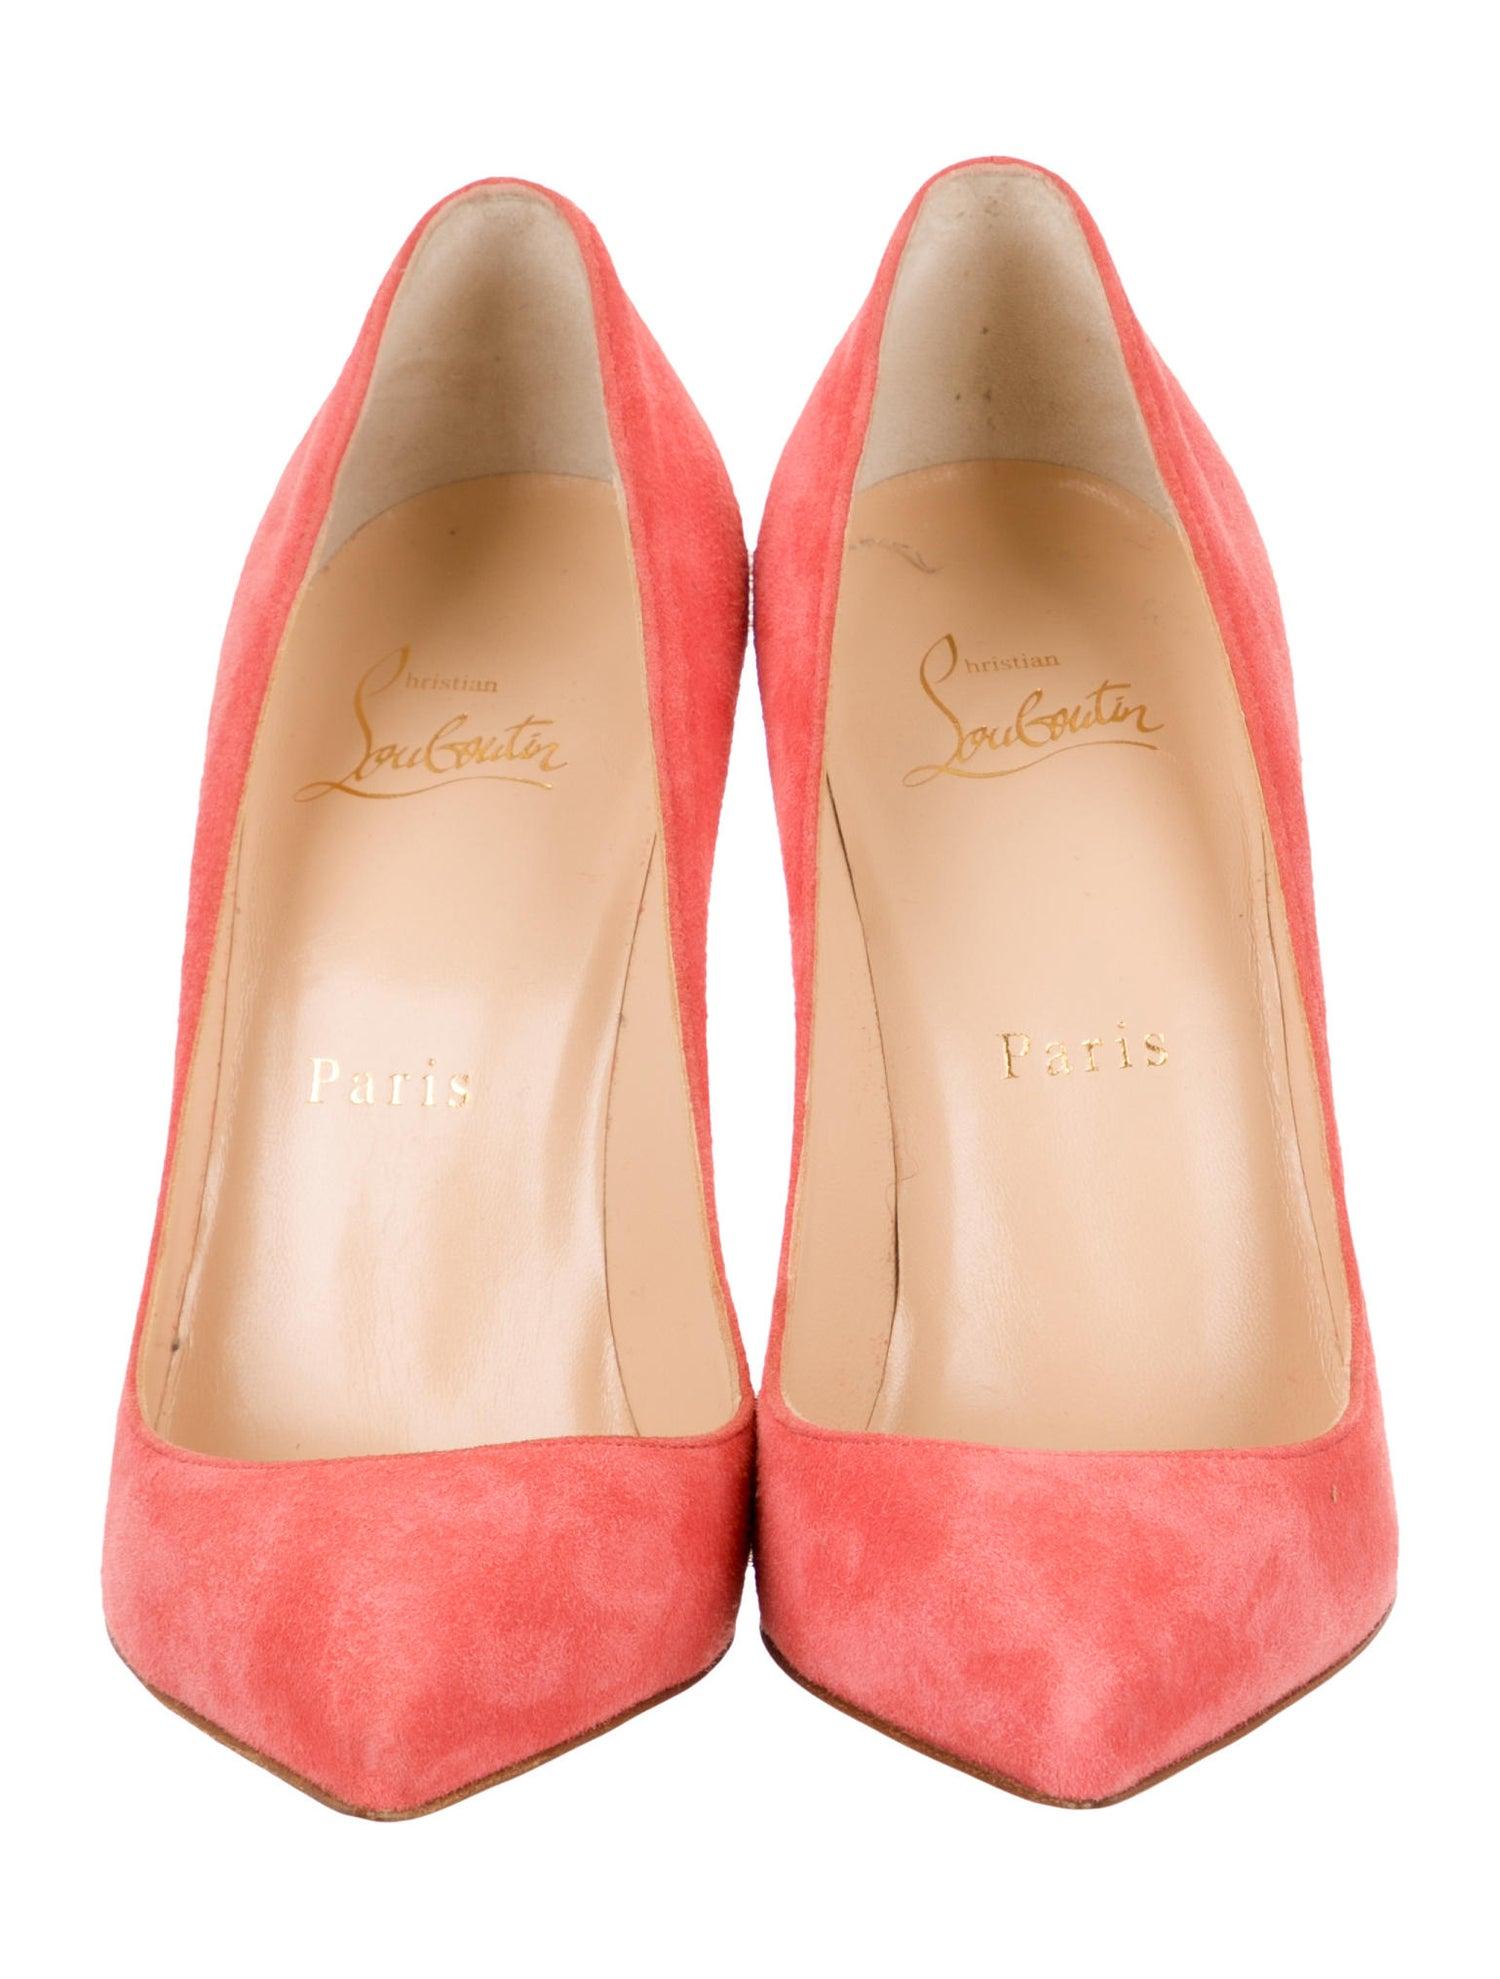 Christian Louboutin NEW Coral Suede Leather Pumps Heels in Box

Size IT 36
Suede
Slip on
Made in Italy
Heel height 4